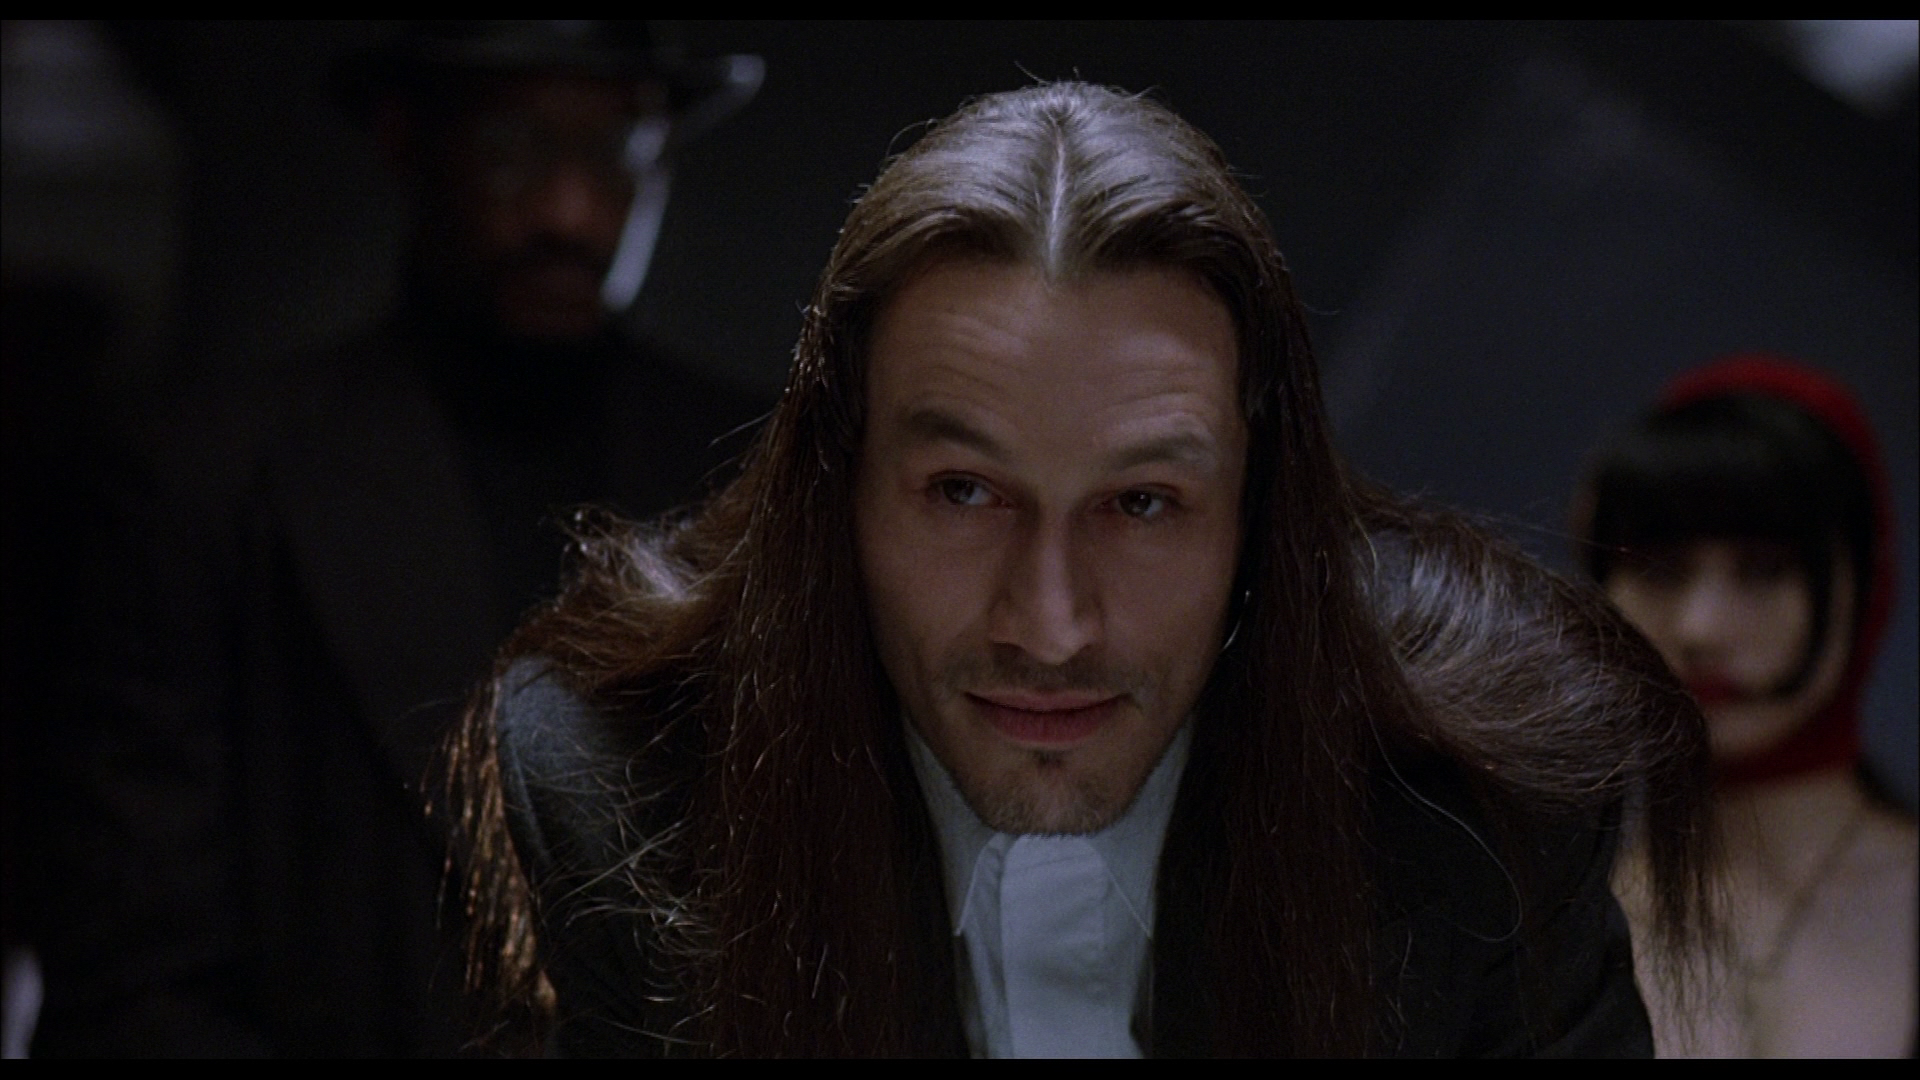 Tony Todd, Michael Wincott and Bai Ling in The Crow